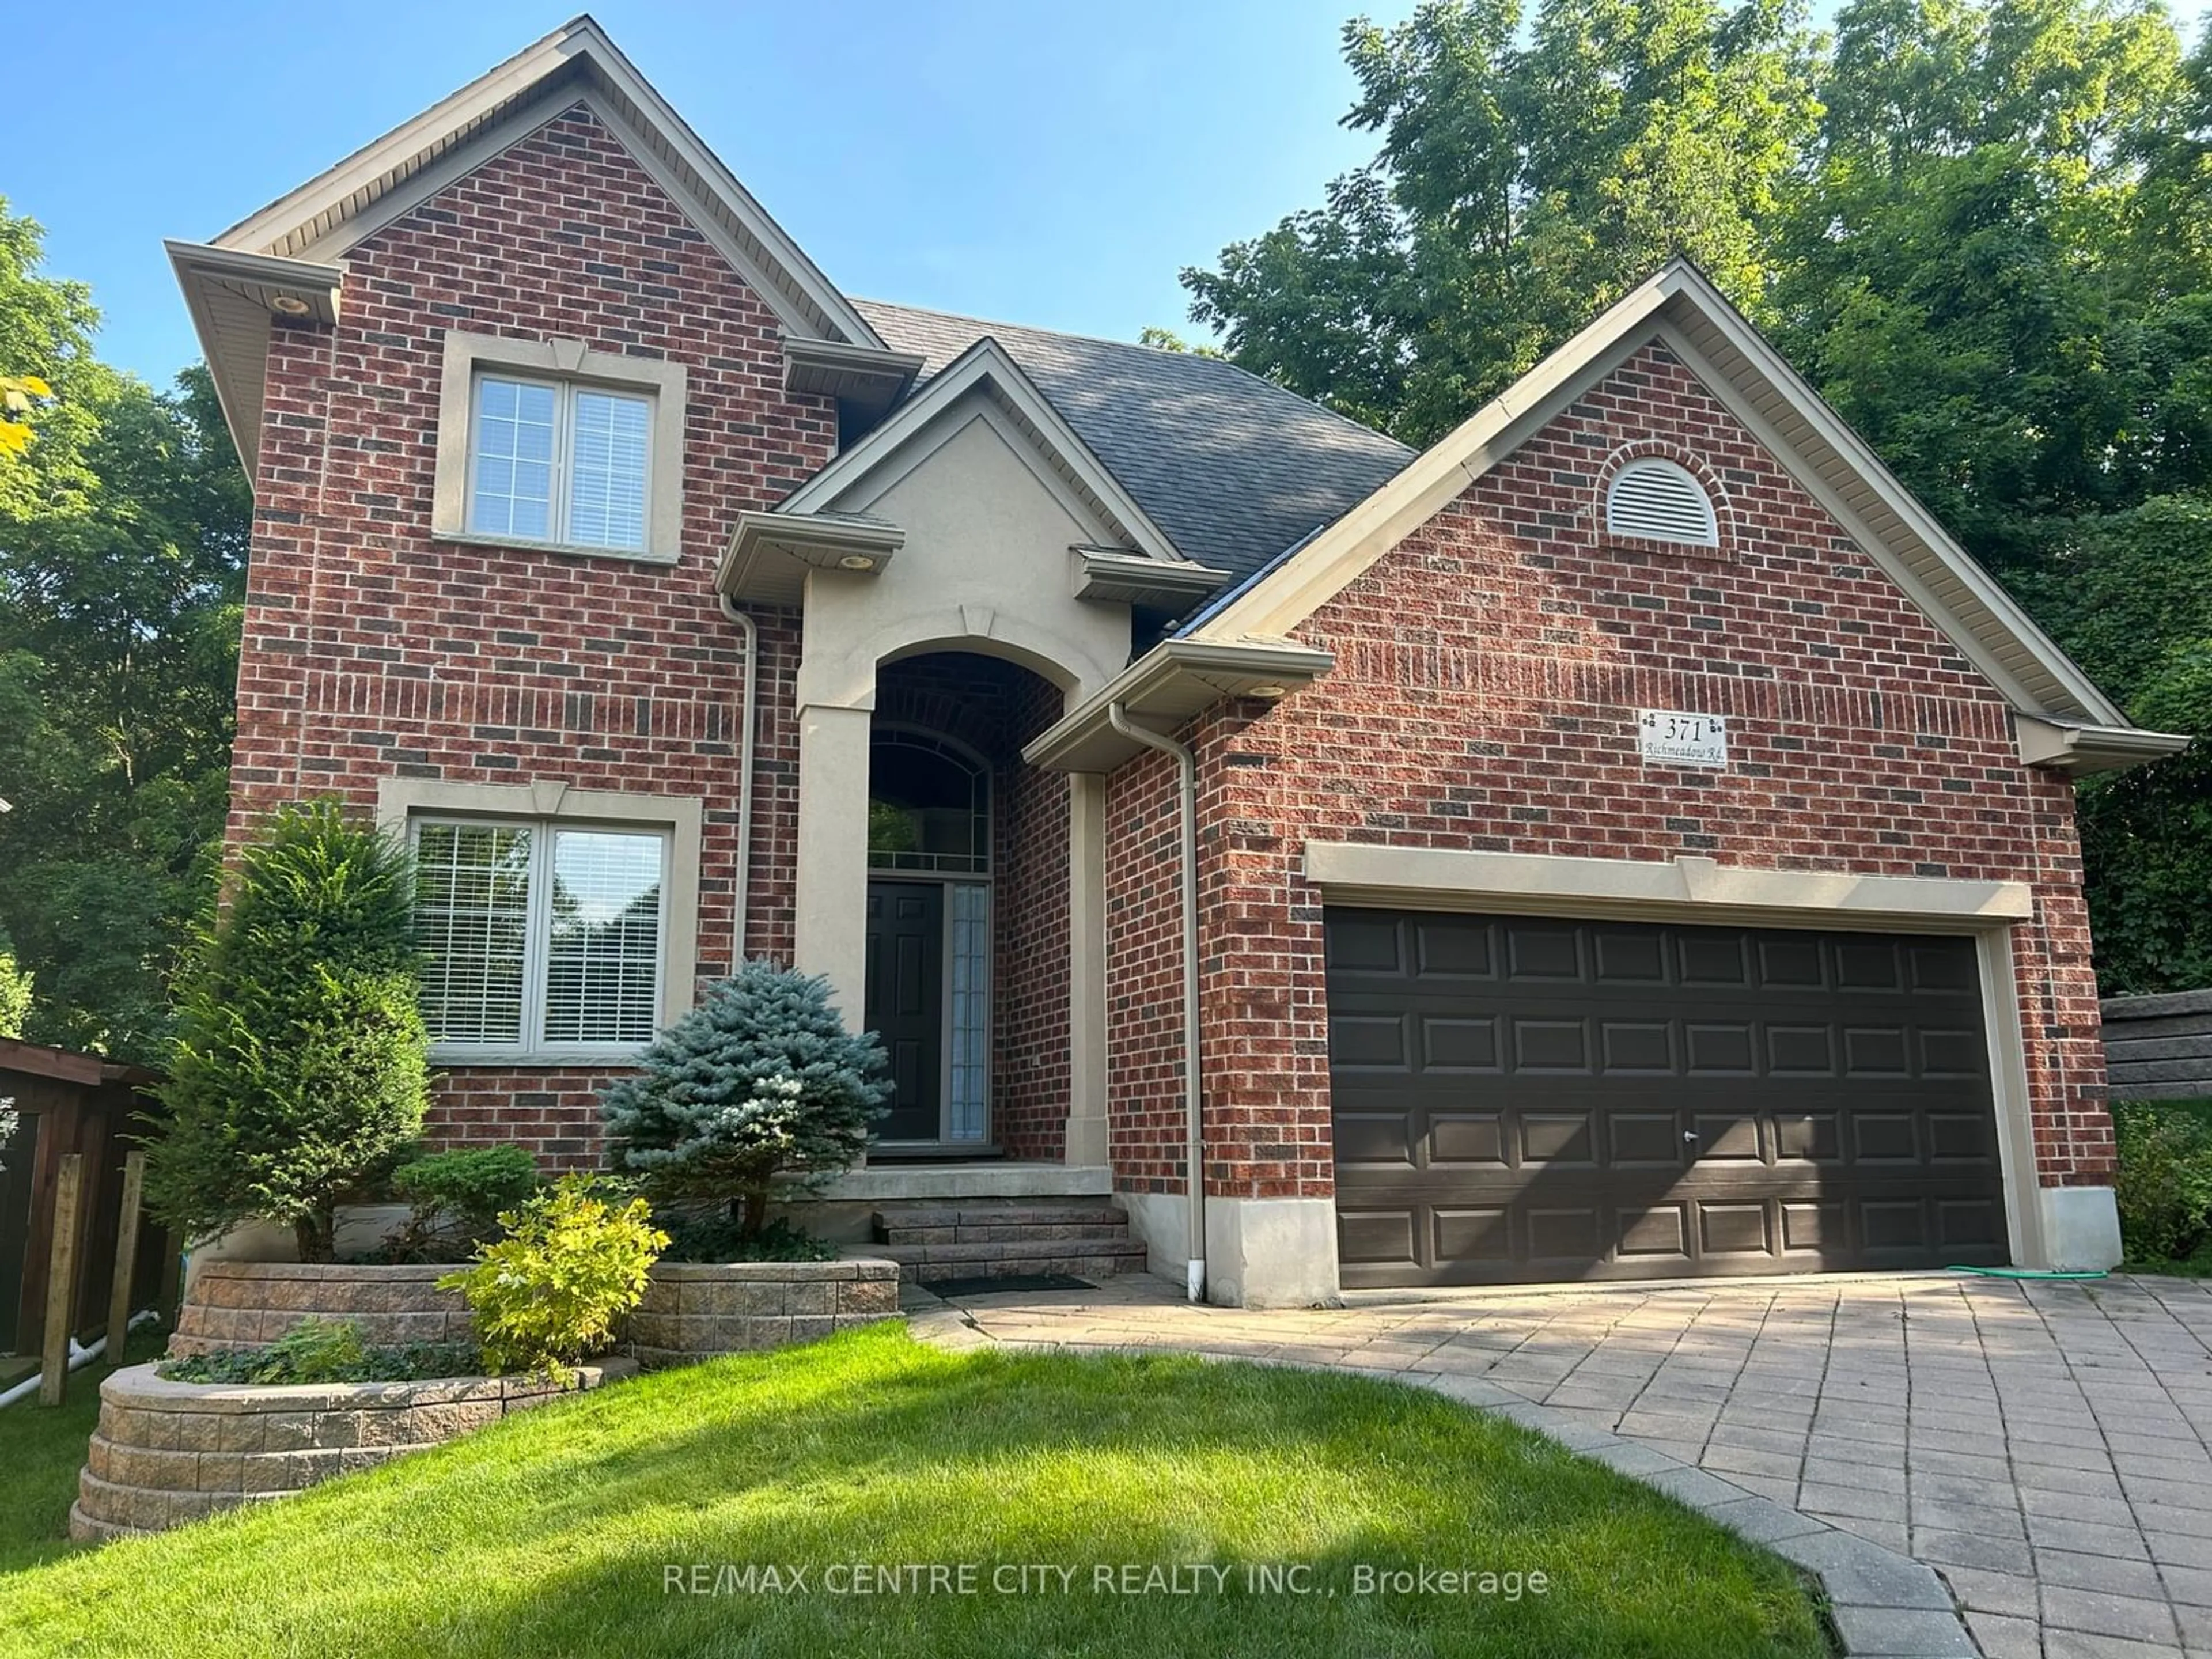 Home with brick exterior material for 371 Richmeadow Rd, London Ontario N6H 5T2